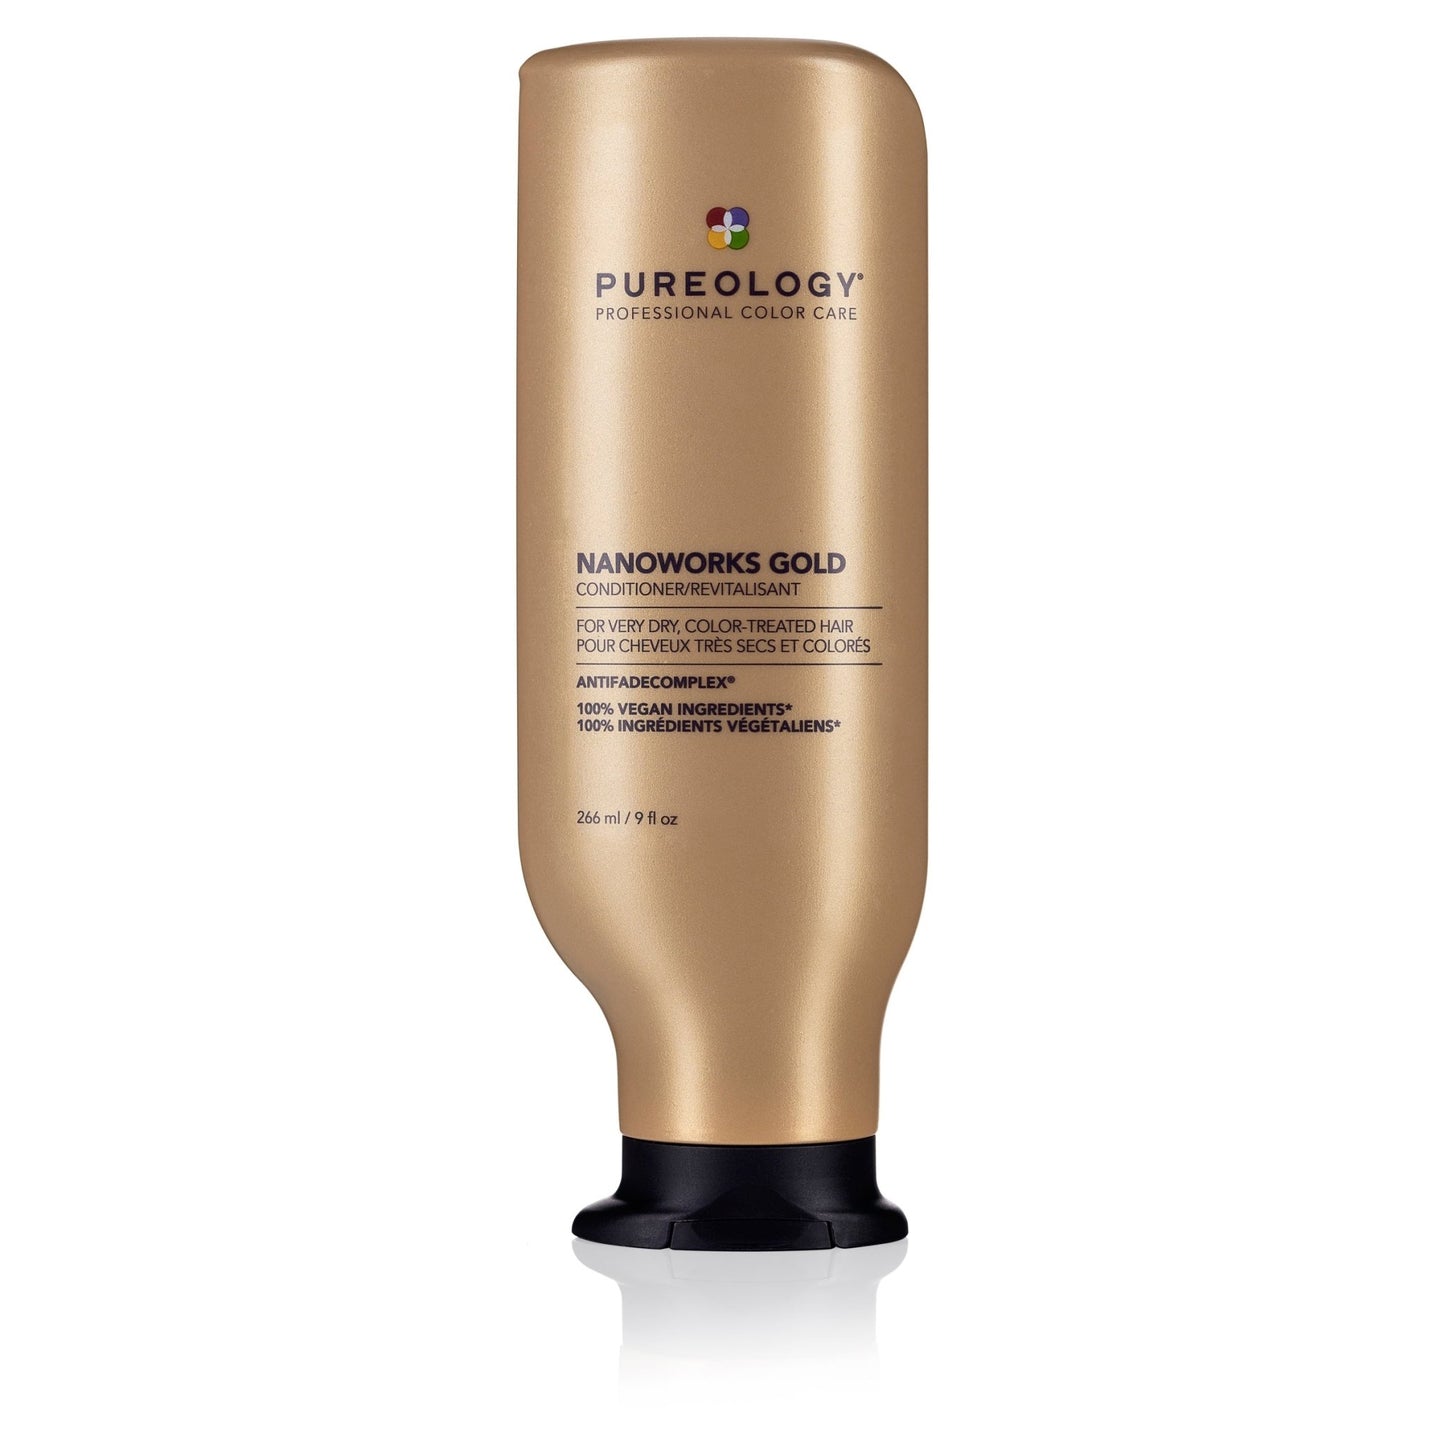 xx Pureology Nanoworks Gold Conditioner 266mL - shelley and co